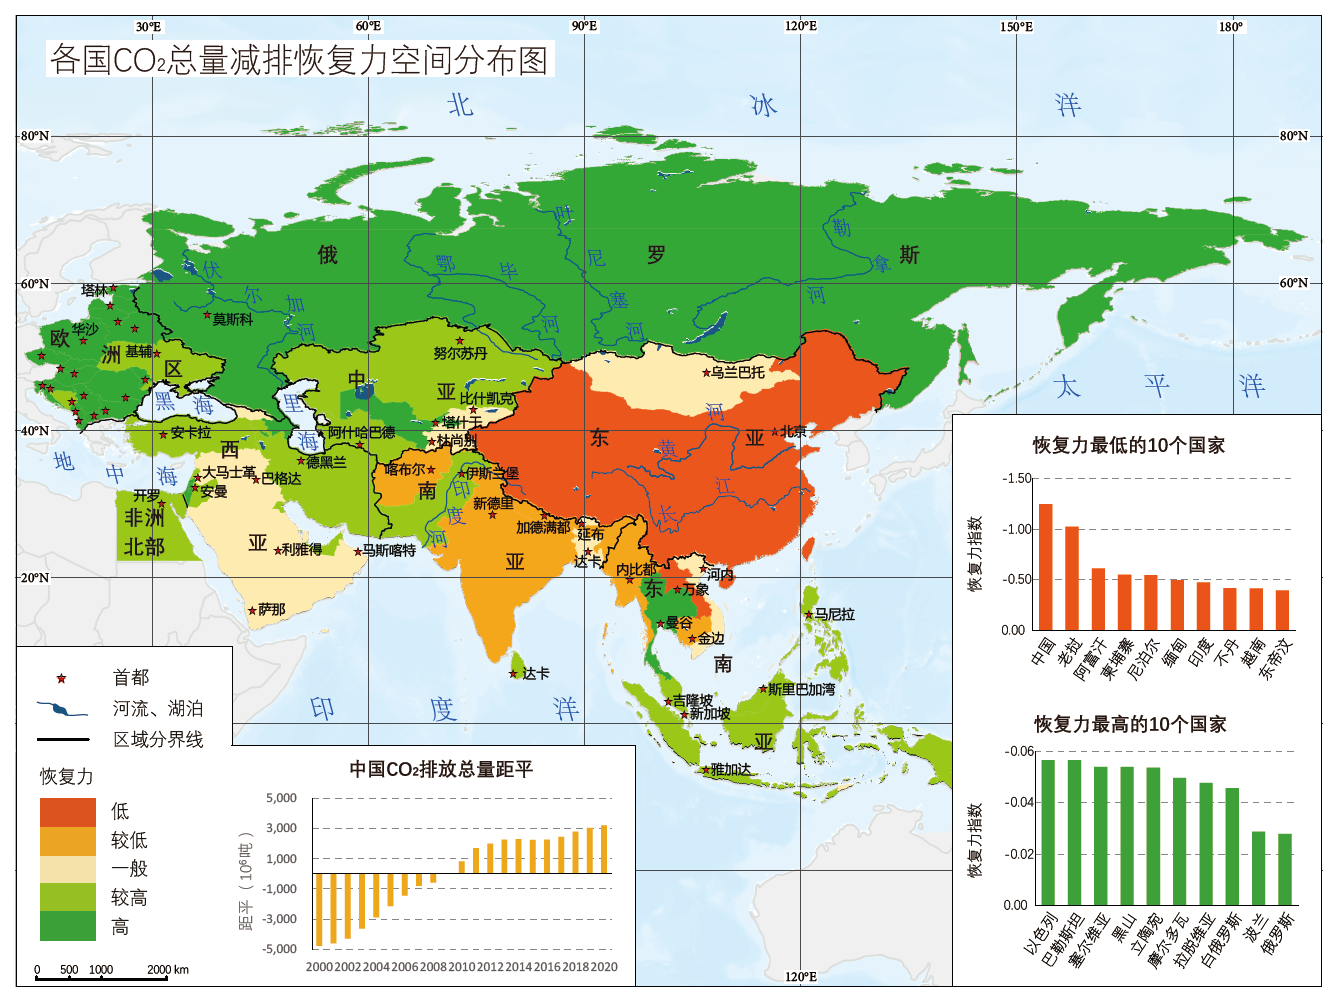 Resilience dataset for CO2 emissions reduction in countries along the Belt and Road (2000-2020)